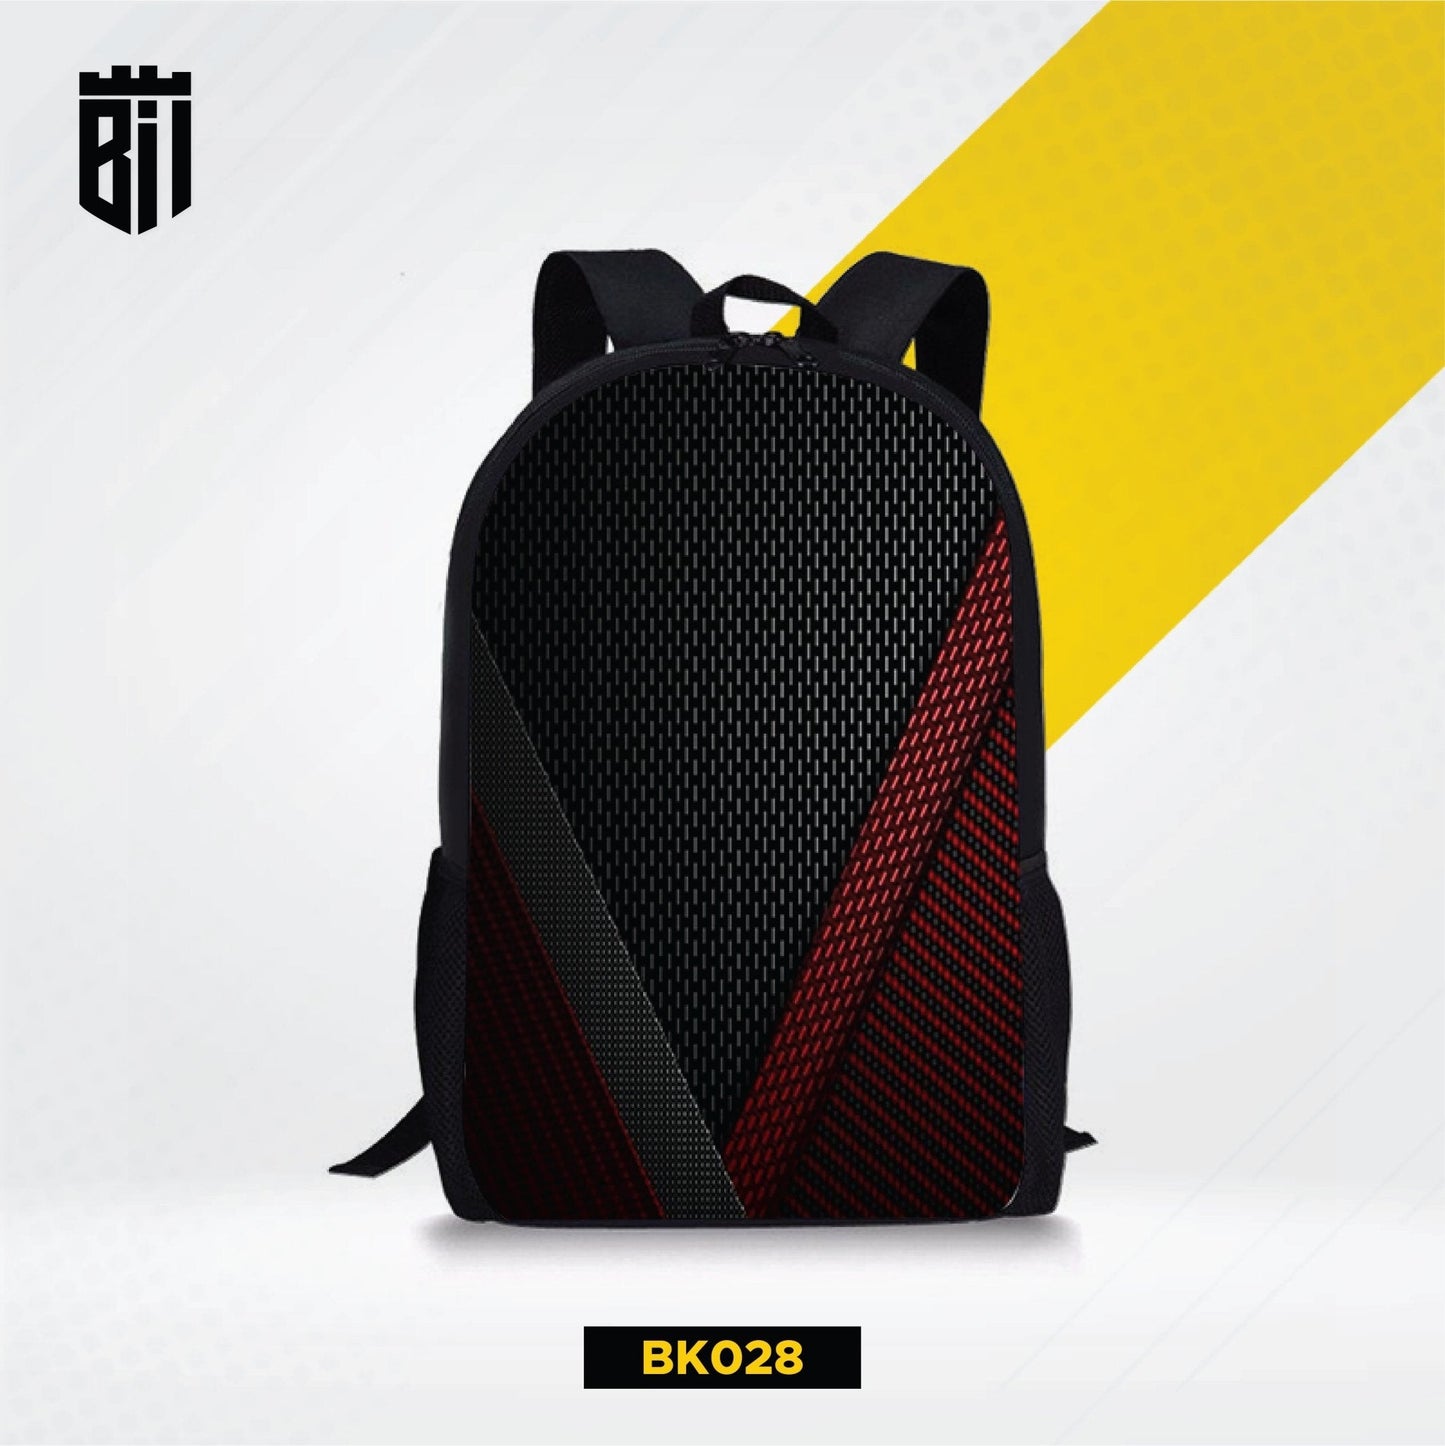 BK028 Black-Red Abstract Backpack - BREACHIT